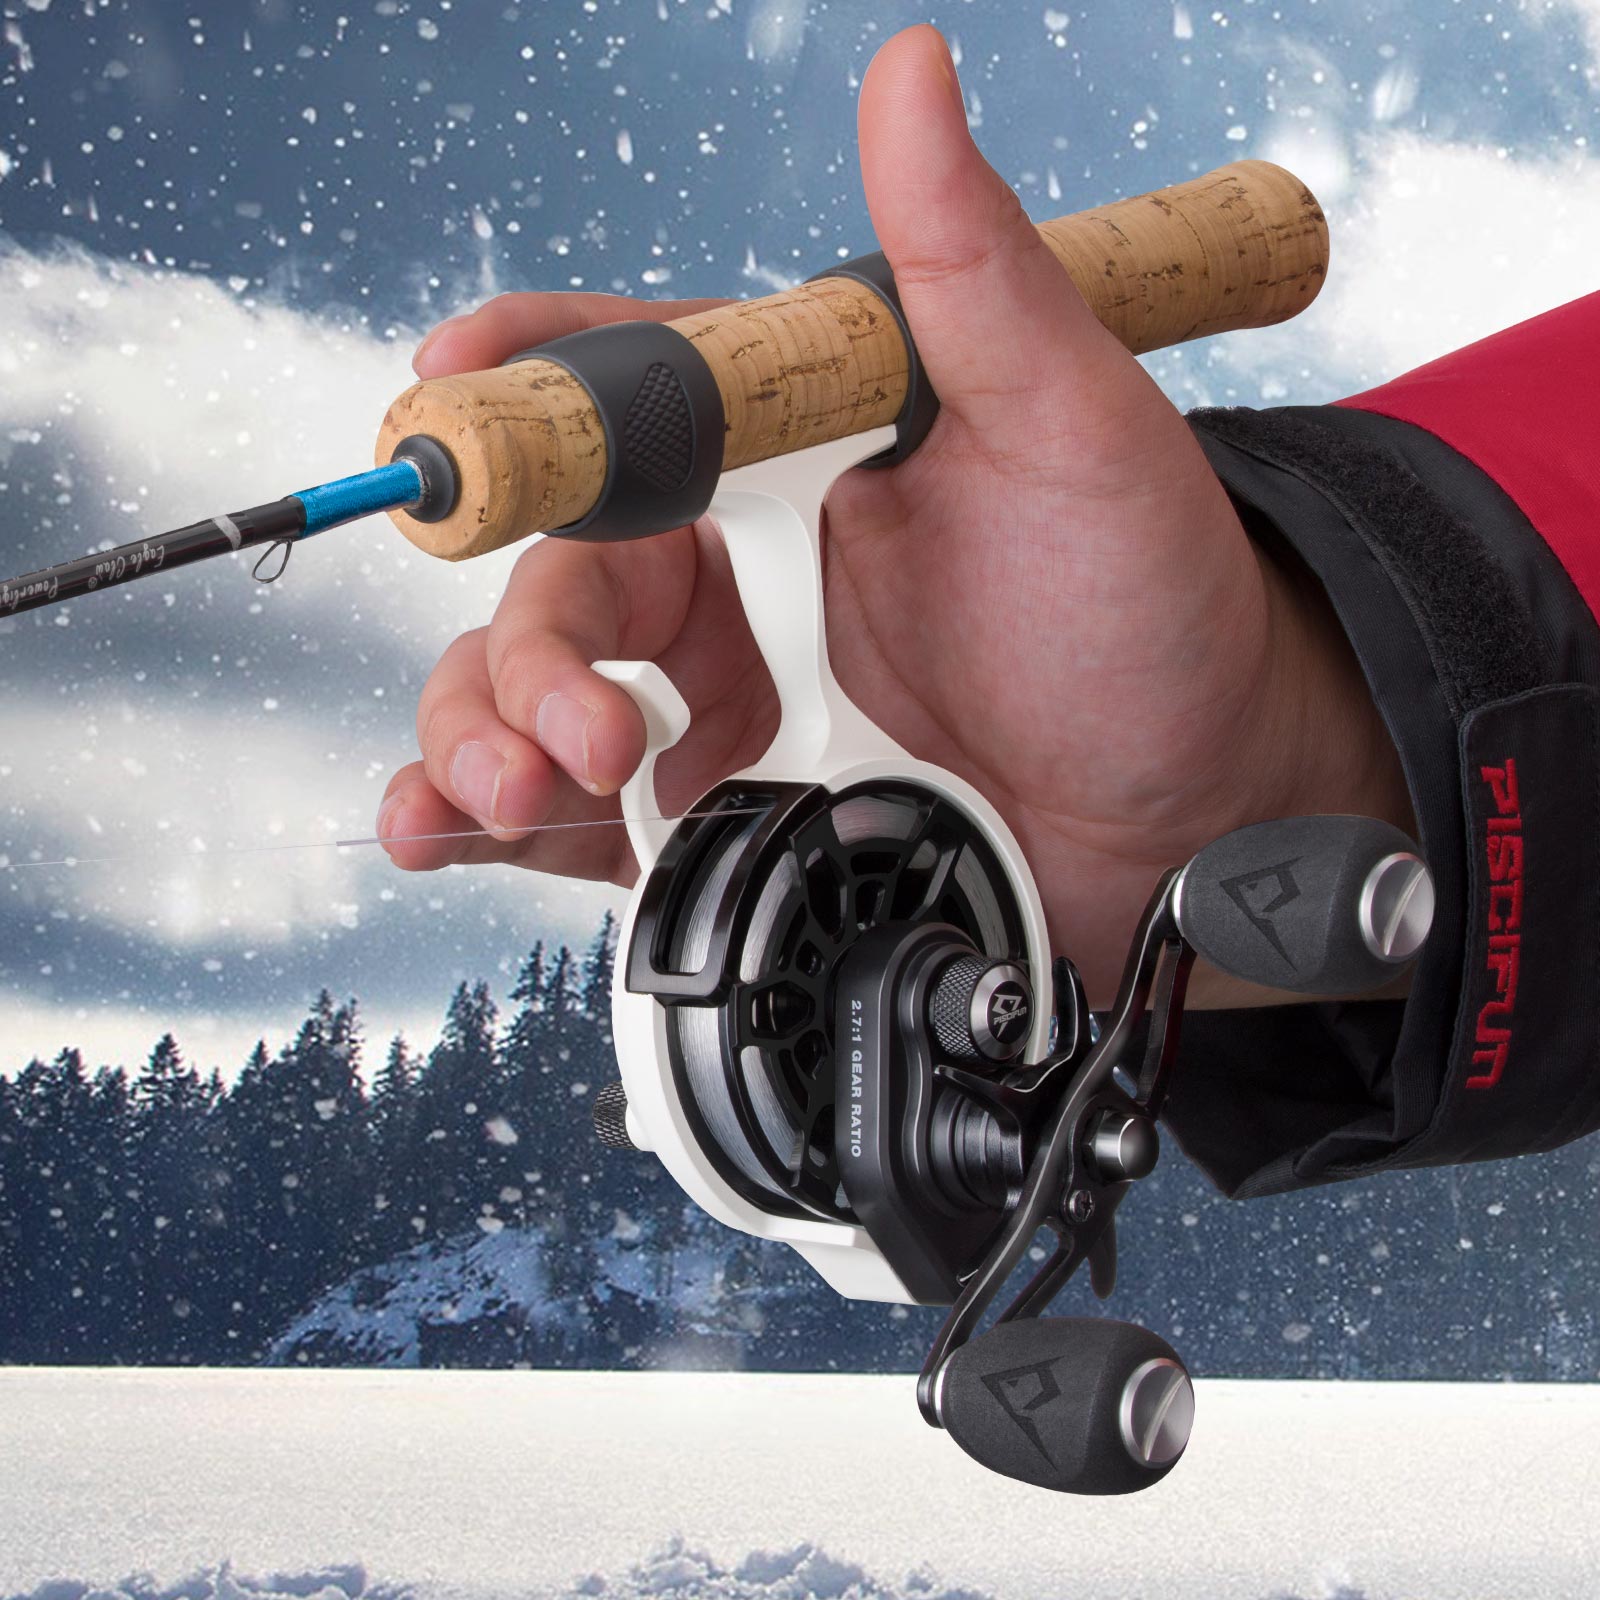 How to spool an inline Ice fishing reel! 